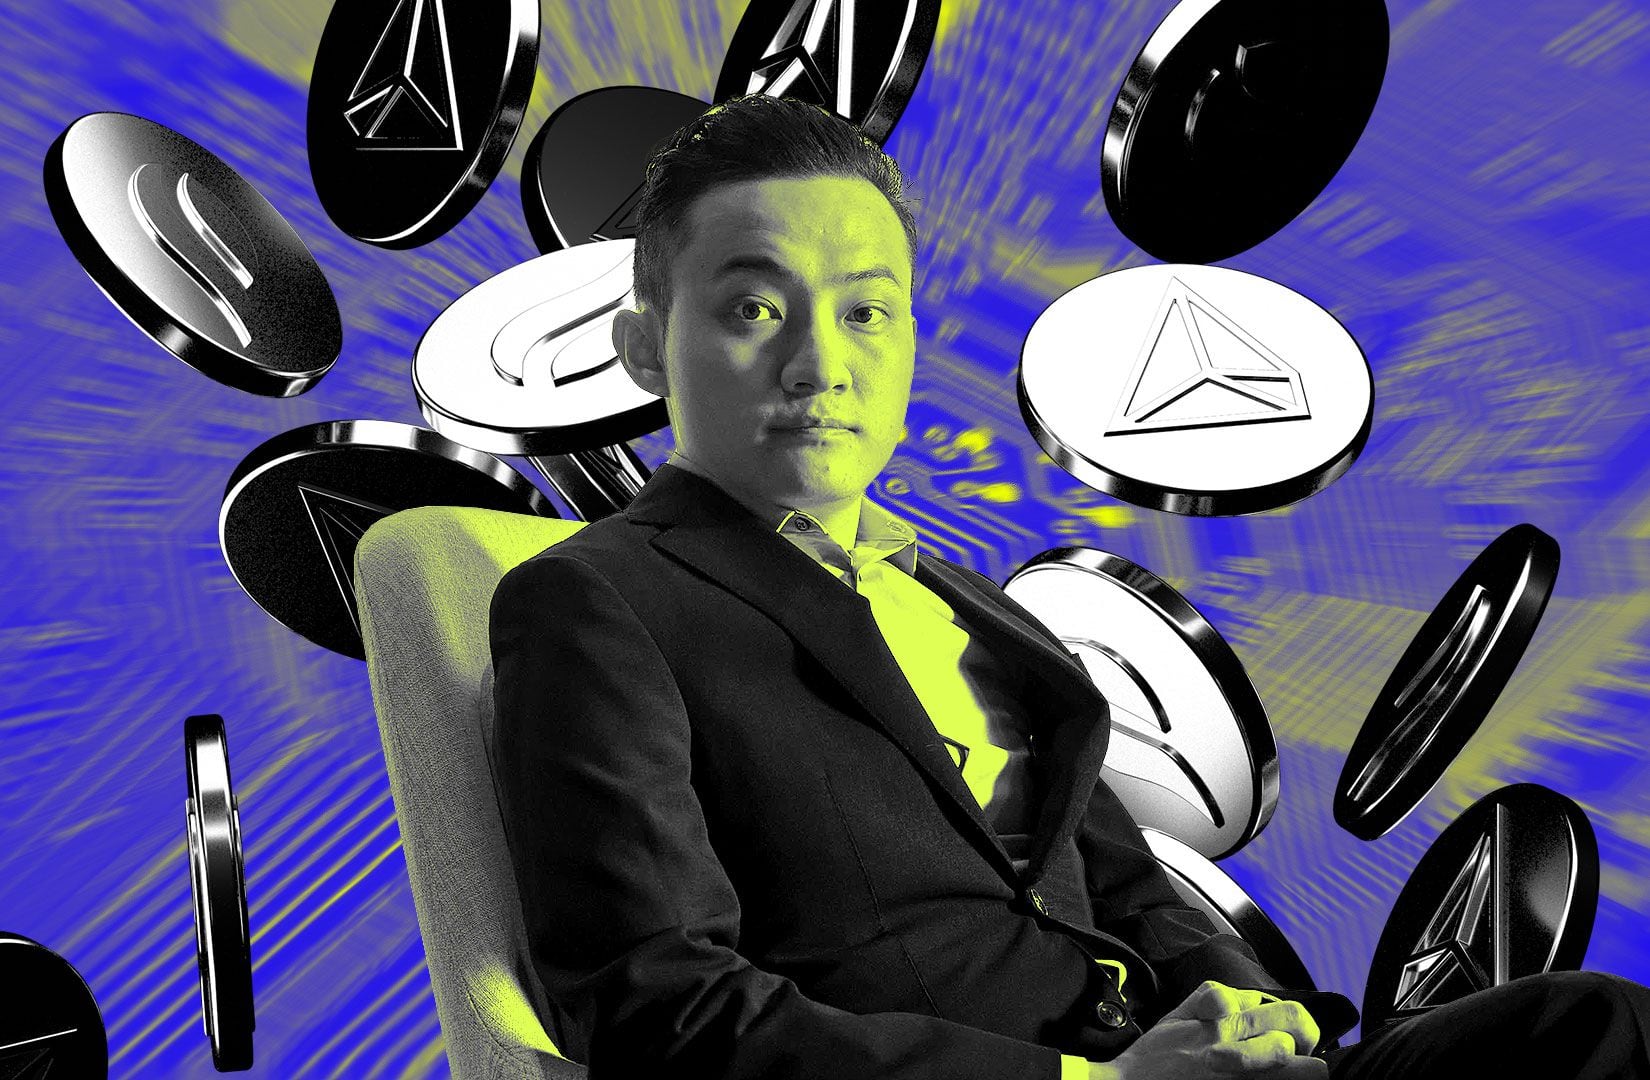 SEC says jurisdiction over Justin Sun justified by Tron founder’s 380 days in US touting projects